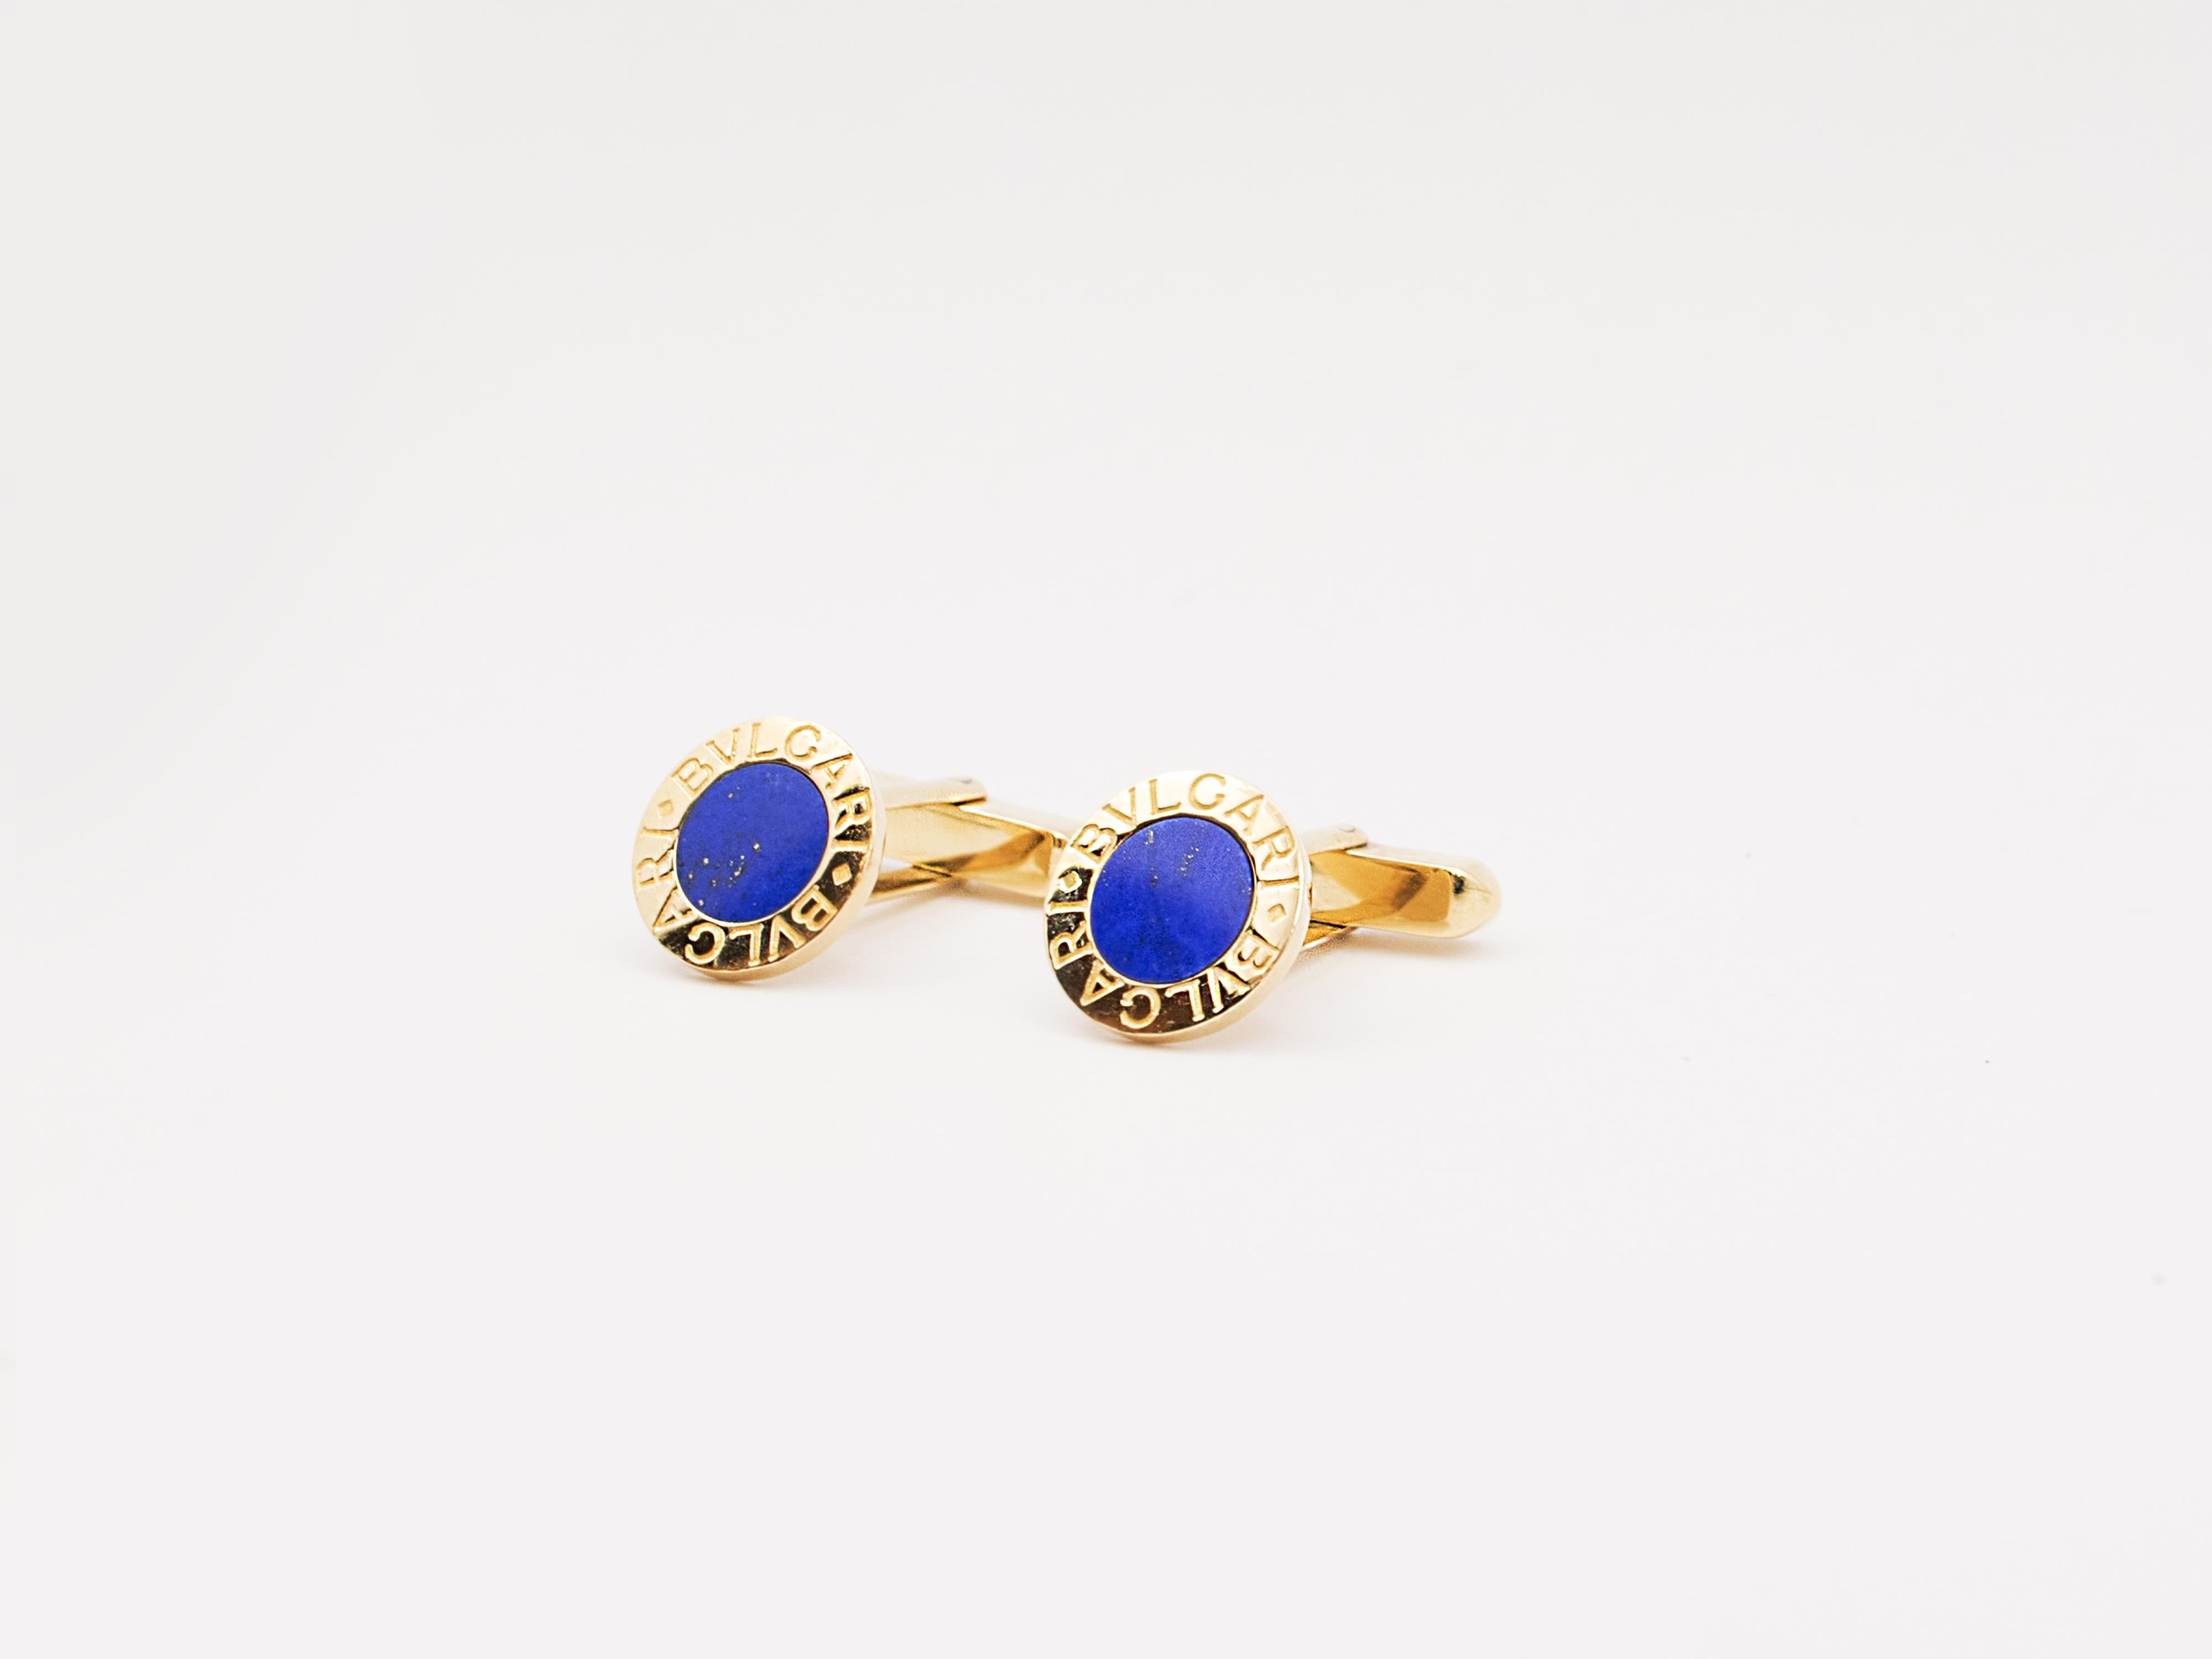 Original Bvlgari cufflinks finely crafted in 18k yellow gold with Lapis Lazuli at the center.
A very collectable Bulgari milestone.
